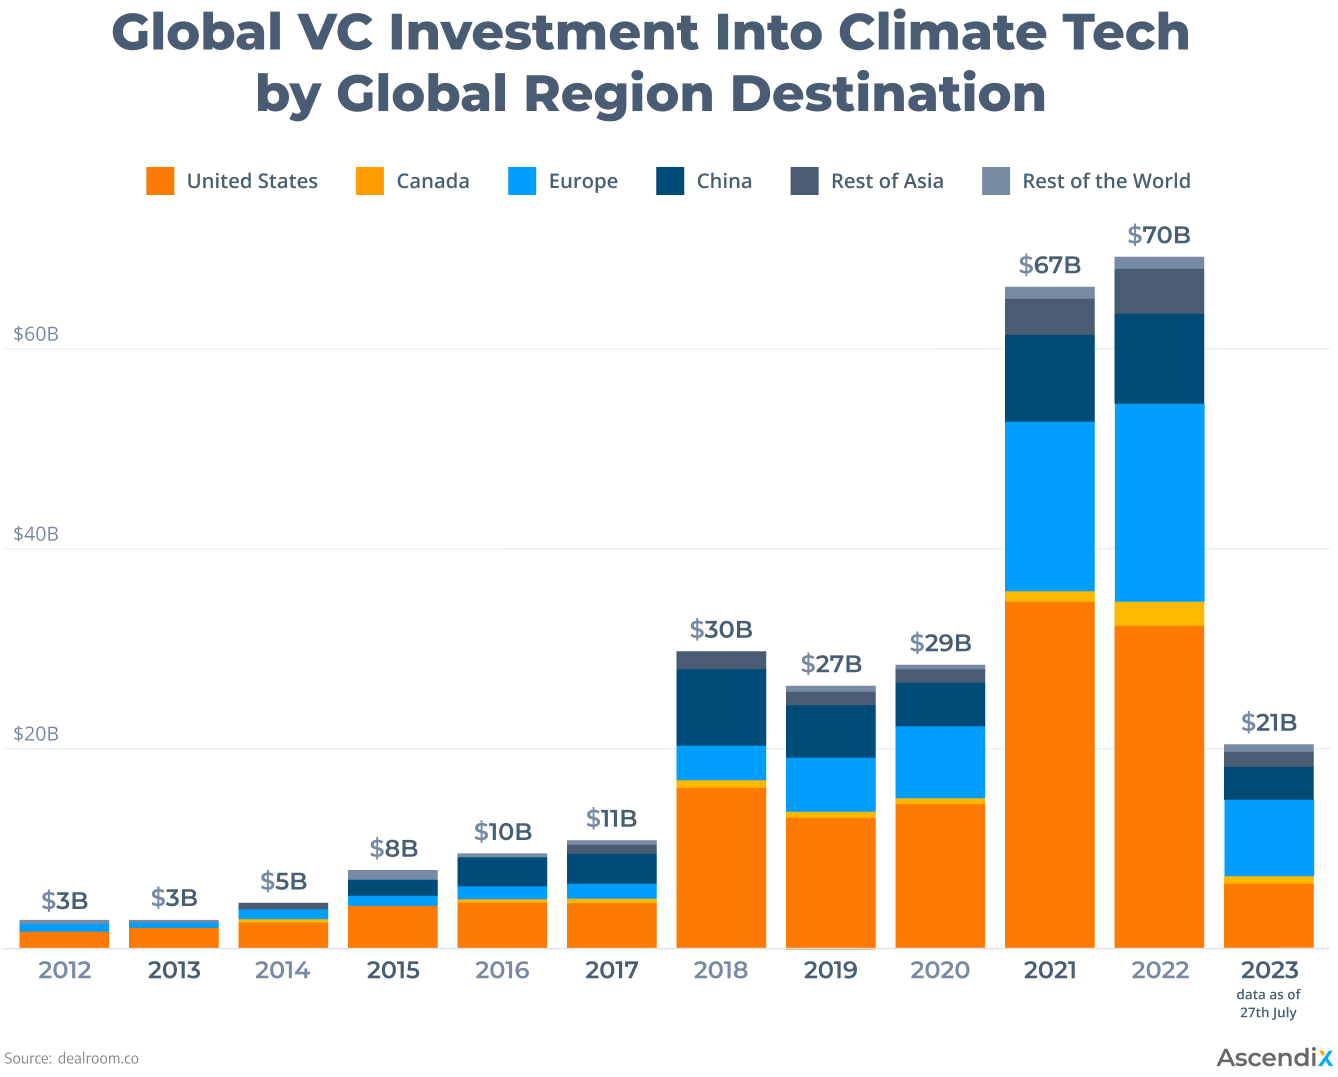 Global VC investment into climate tech by global region destination